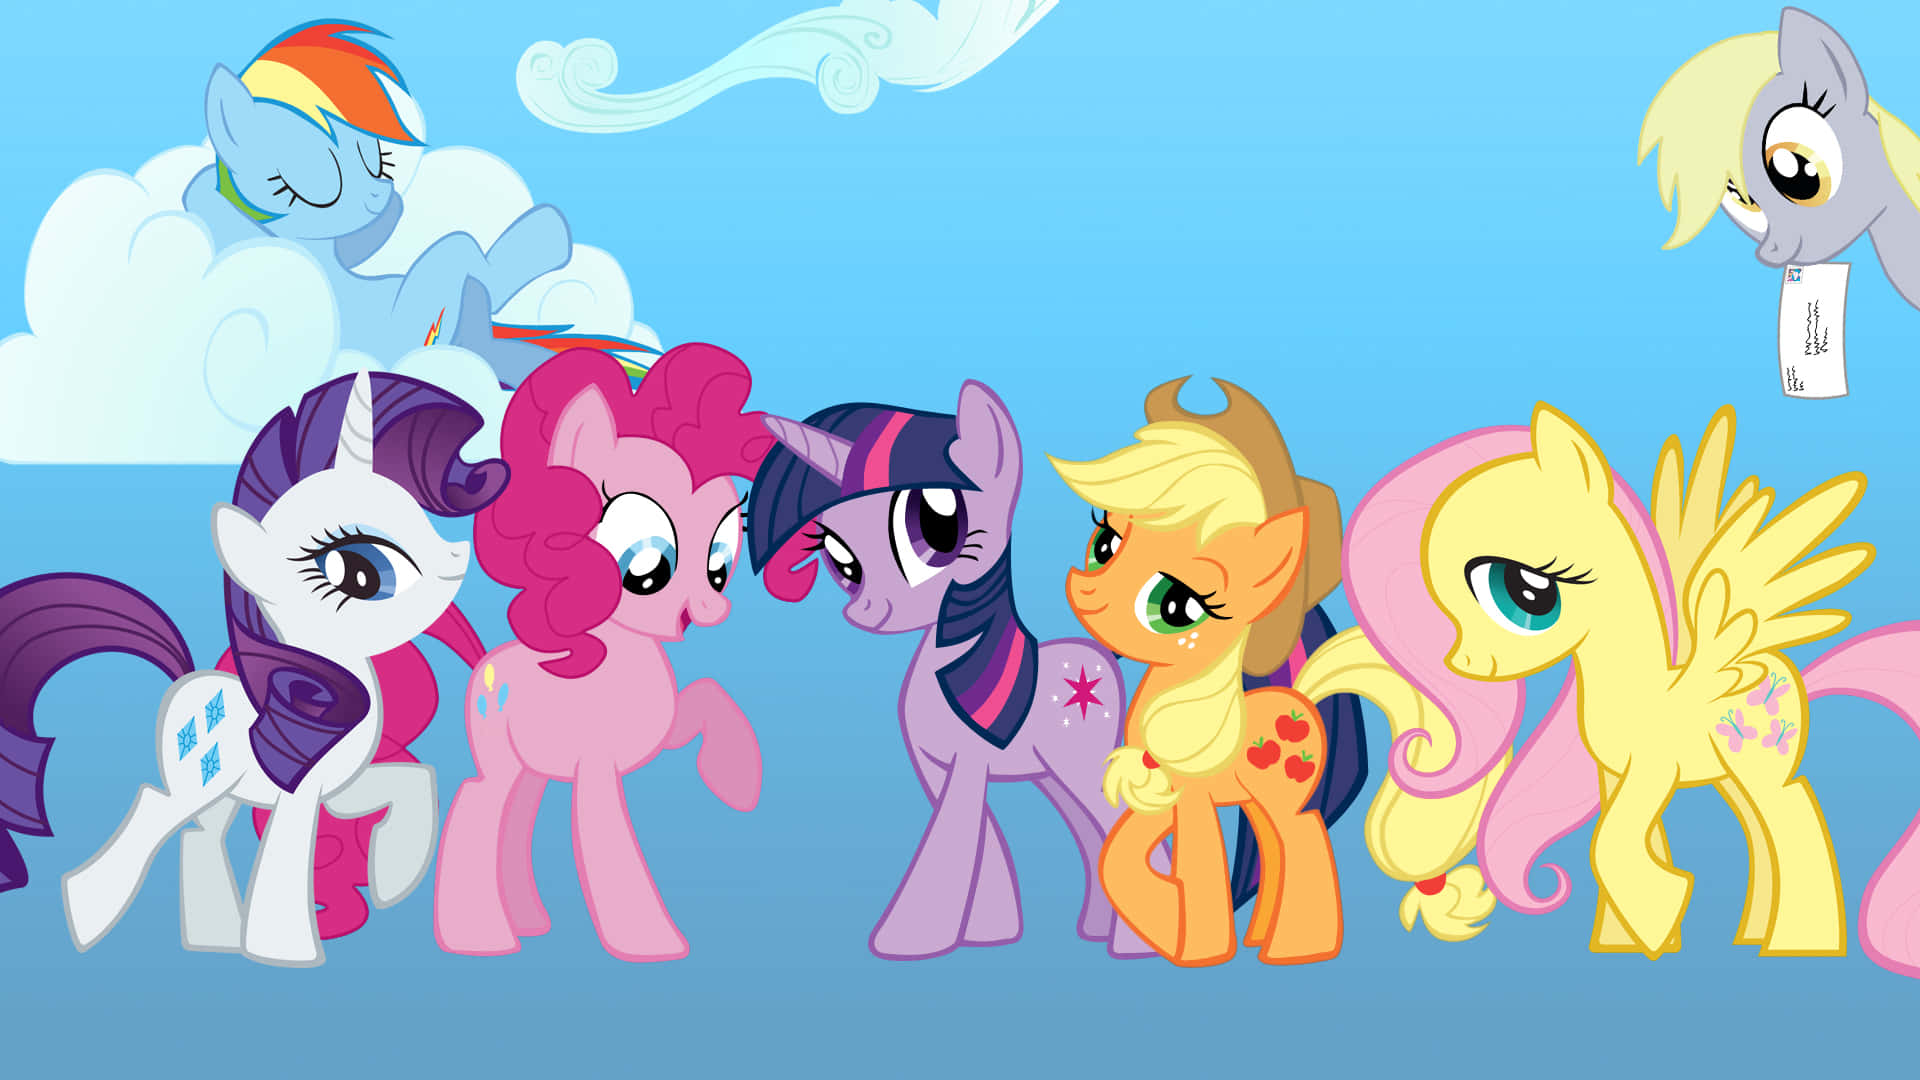 A Group Of Pony's Standing Together